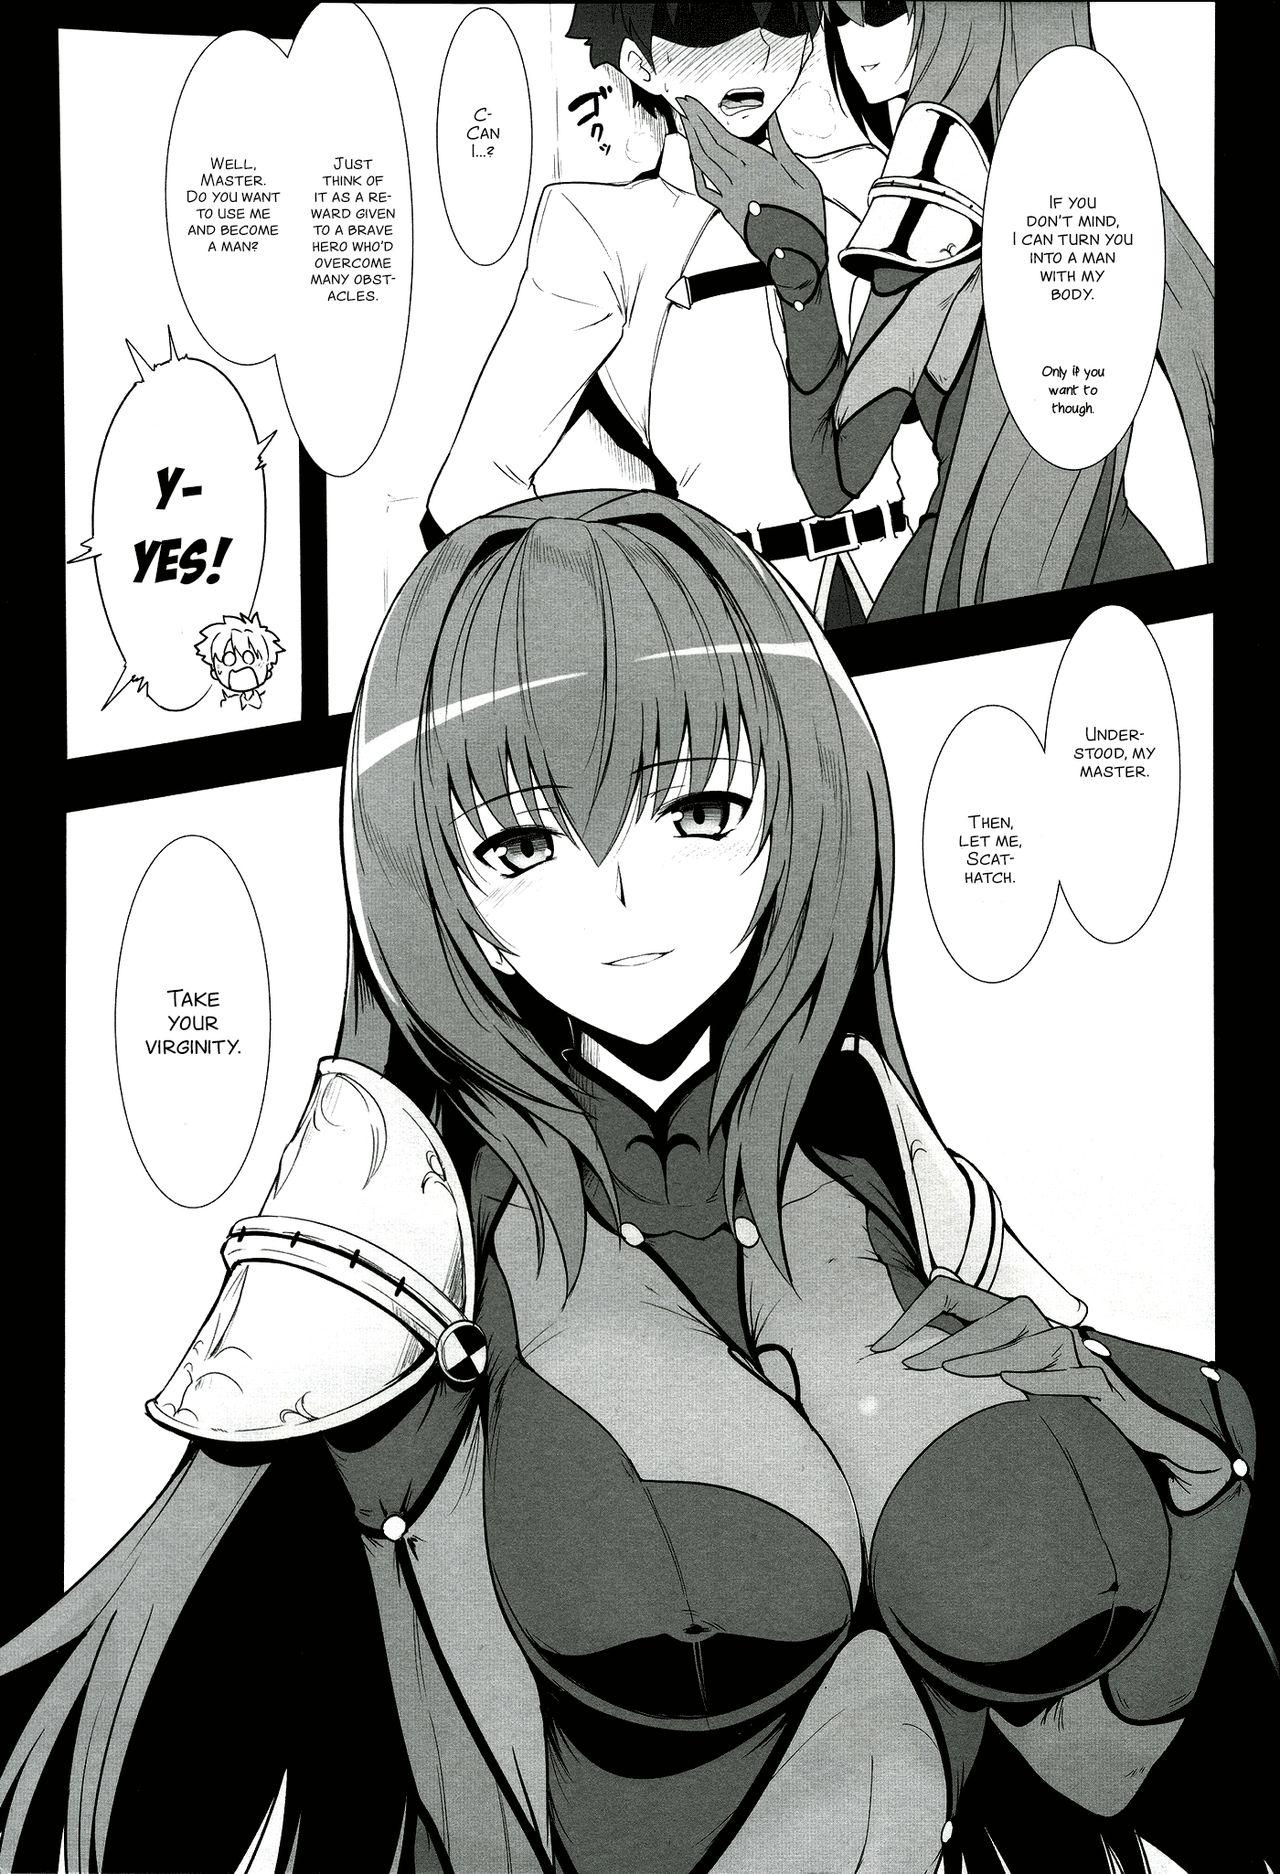 Cunt AH! MY MISTRESS! - Fate grand order Petite Teen - Page 6